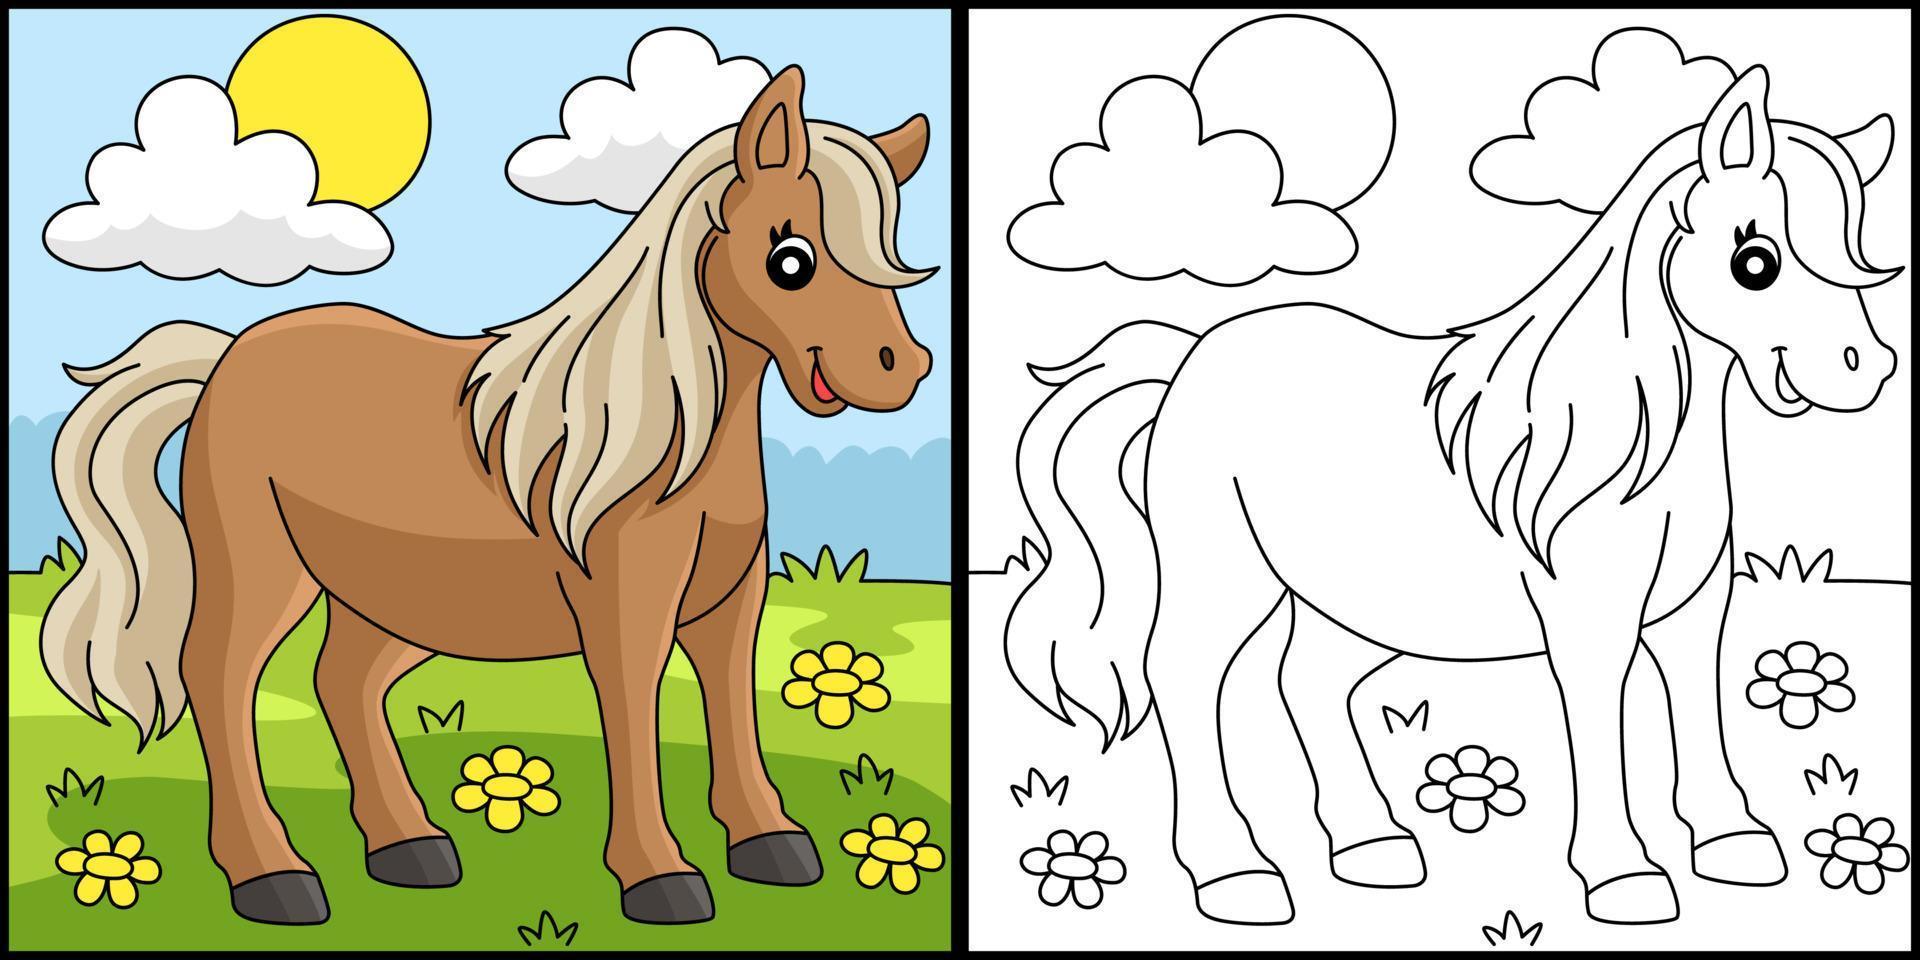 Pony Animal Coloring Page Colored Illustration vector